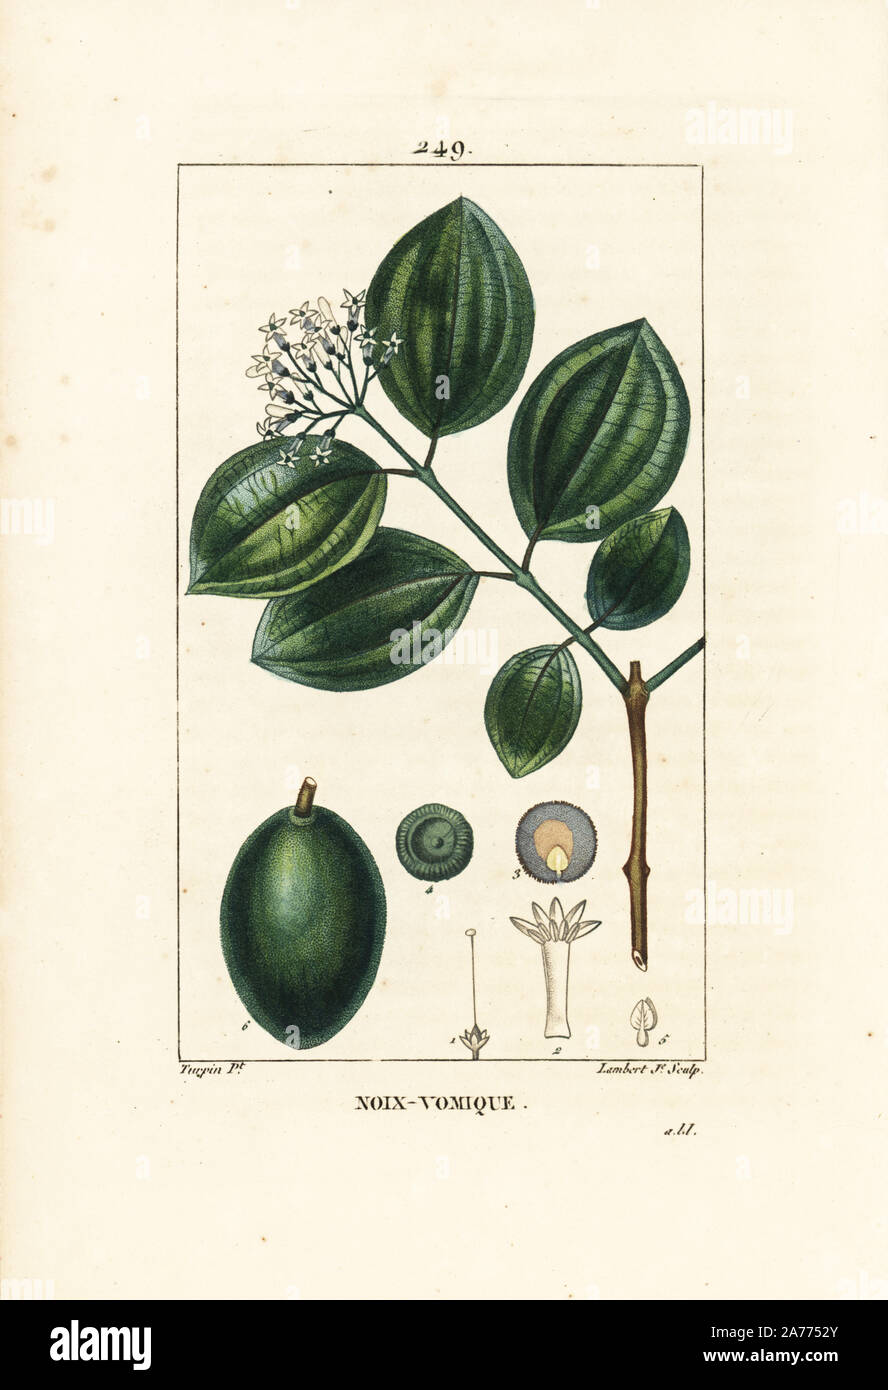 Strychnine tree or poison nut, Strychnos nux-vomica, with fruit, seed, leaf and flower. Handcoloured stipple copperplate engraving by Lambert Junior from a drawing by Pierre Jean-Francois Turpin from Chaumeton, Poiret and Chamberet's 'La Flore Medicale,' Paris, Panckoucke, 1830. Turpin (17751840) was one of the three giants of French botanical art of the era alongside Pierre Joseph Redoute and Pancrace Bessa. Stock Photo